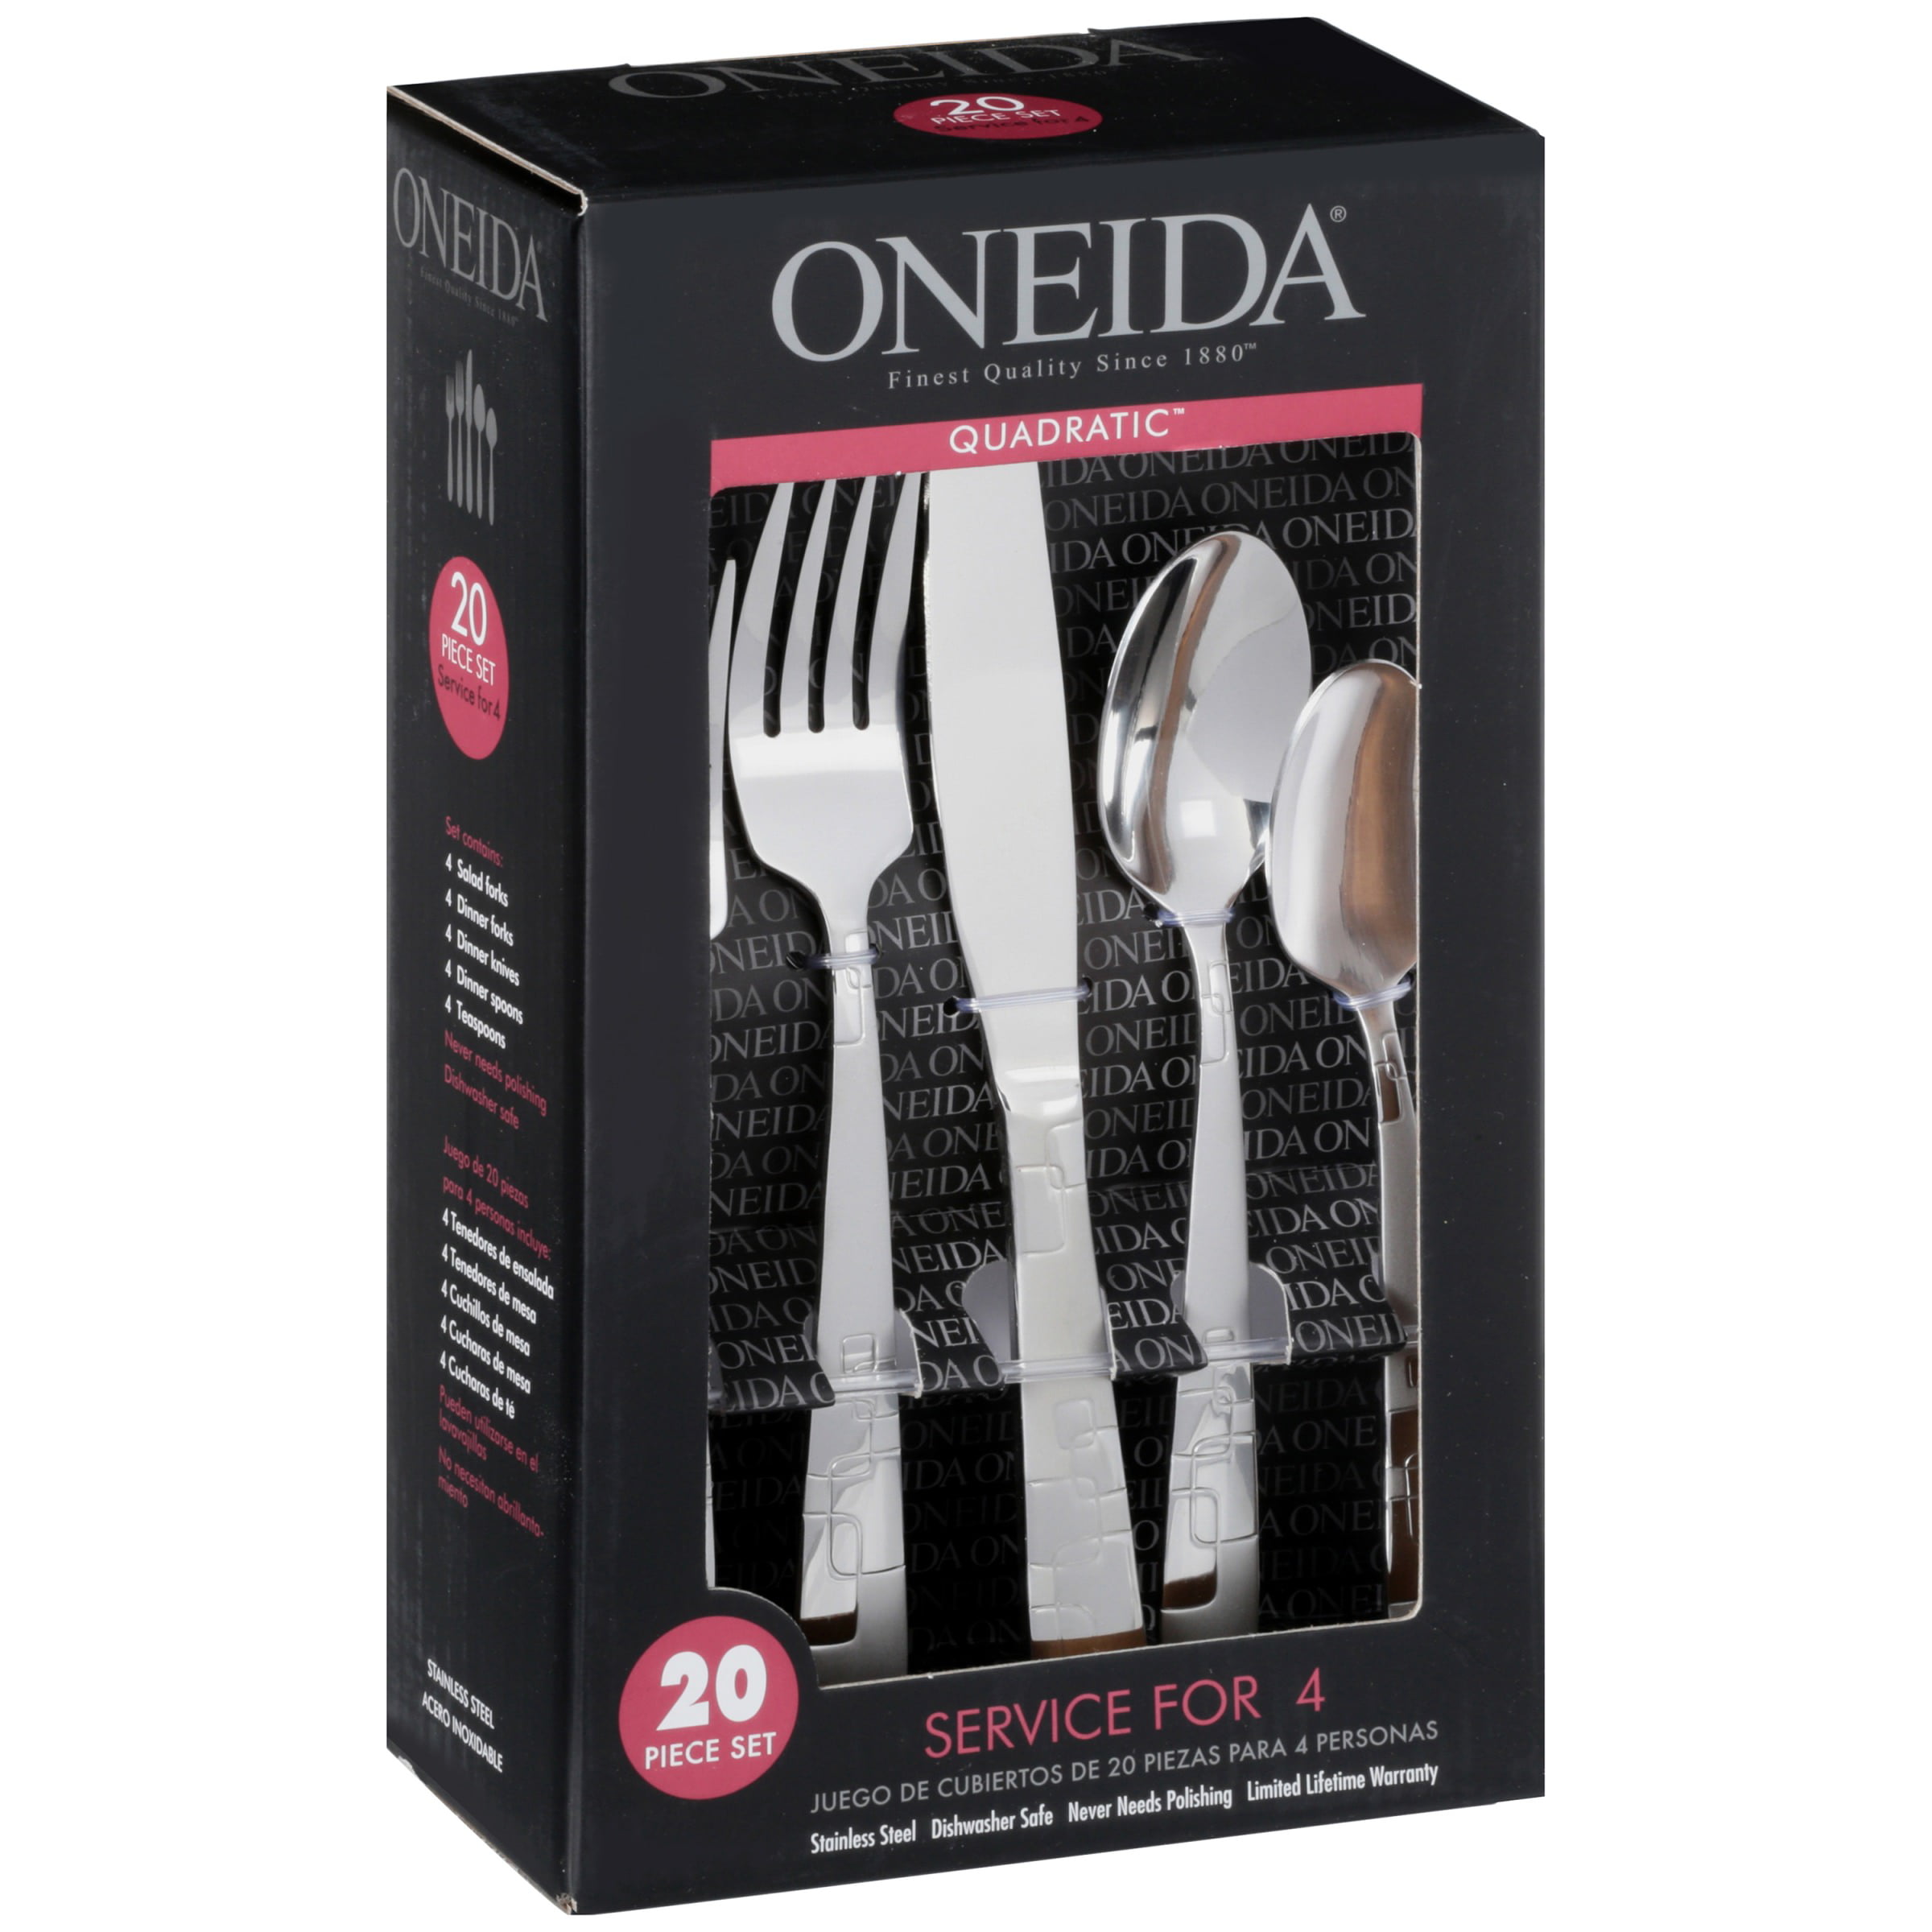 Oneida Quadratic Stainless Steel 4 Dinner Knives Replacement Flatware X7788 